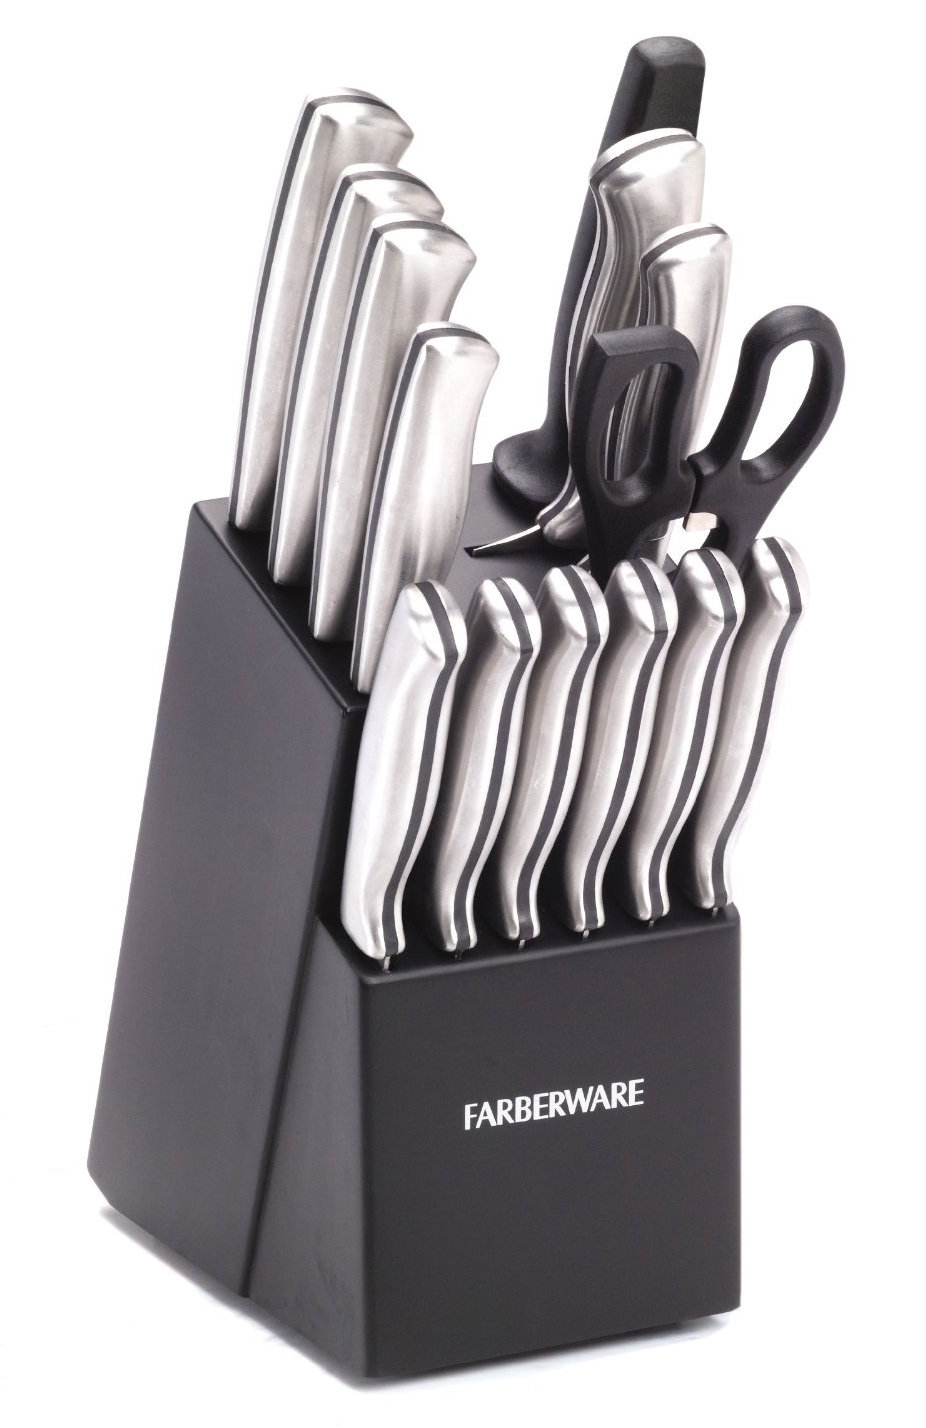 https://9to5toys.com/wp-content/uploads/sites/5/2015/07/farberware-15-piece-stamped-stainless-steel-cutlery-set-sale-01.jpg